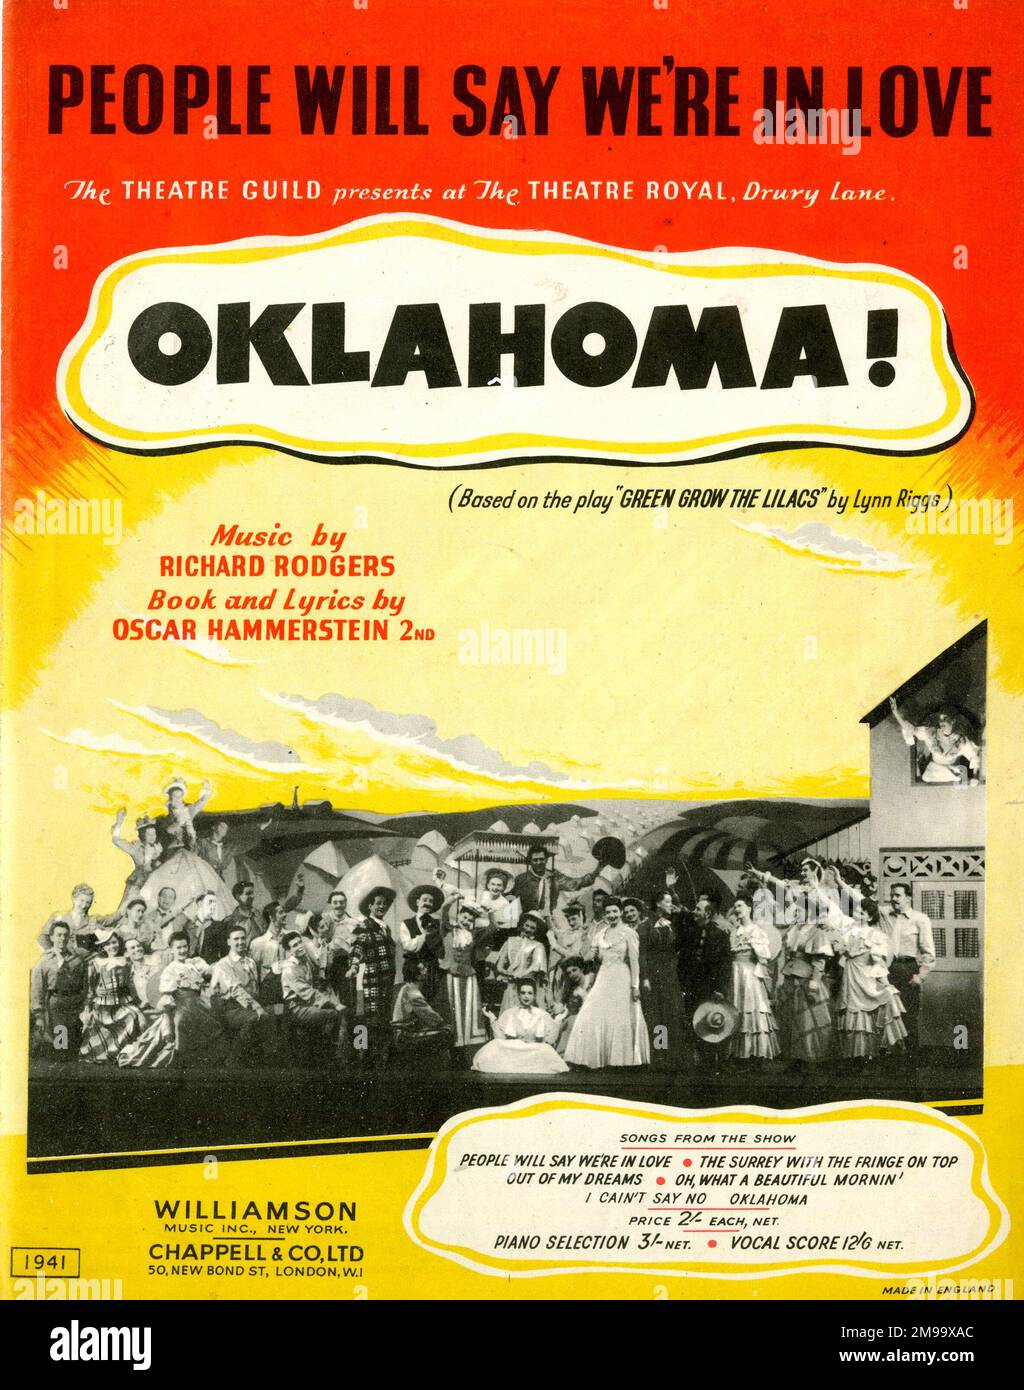 Music cover, People Will Say We're in Love (Oklahoma!), music by Richard Rodgers, book and lyrics by Oscar Hammerstein (as performed at the Theatre Royal, Drury Lane, London). Stock Photo